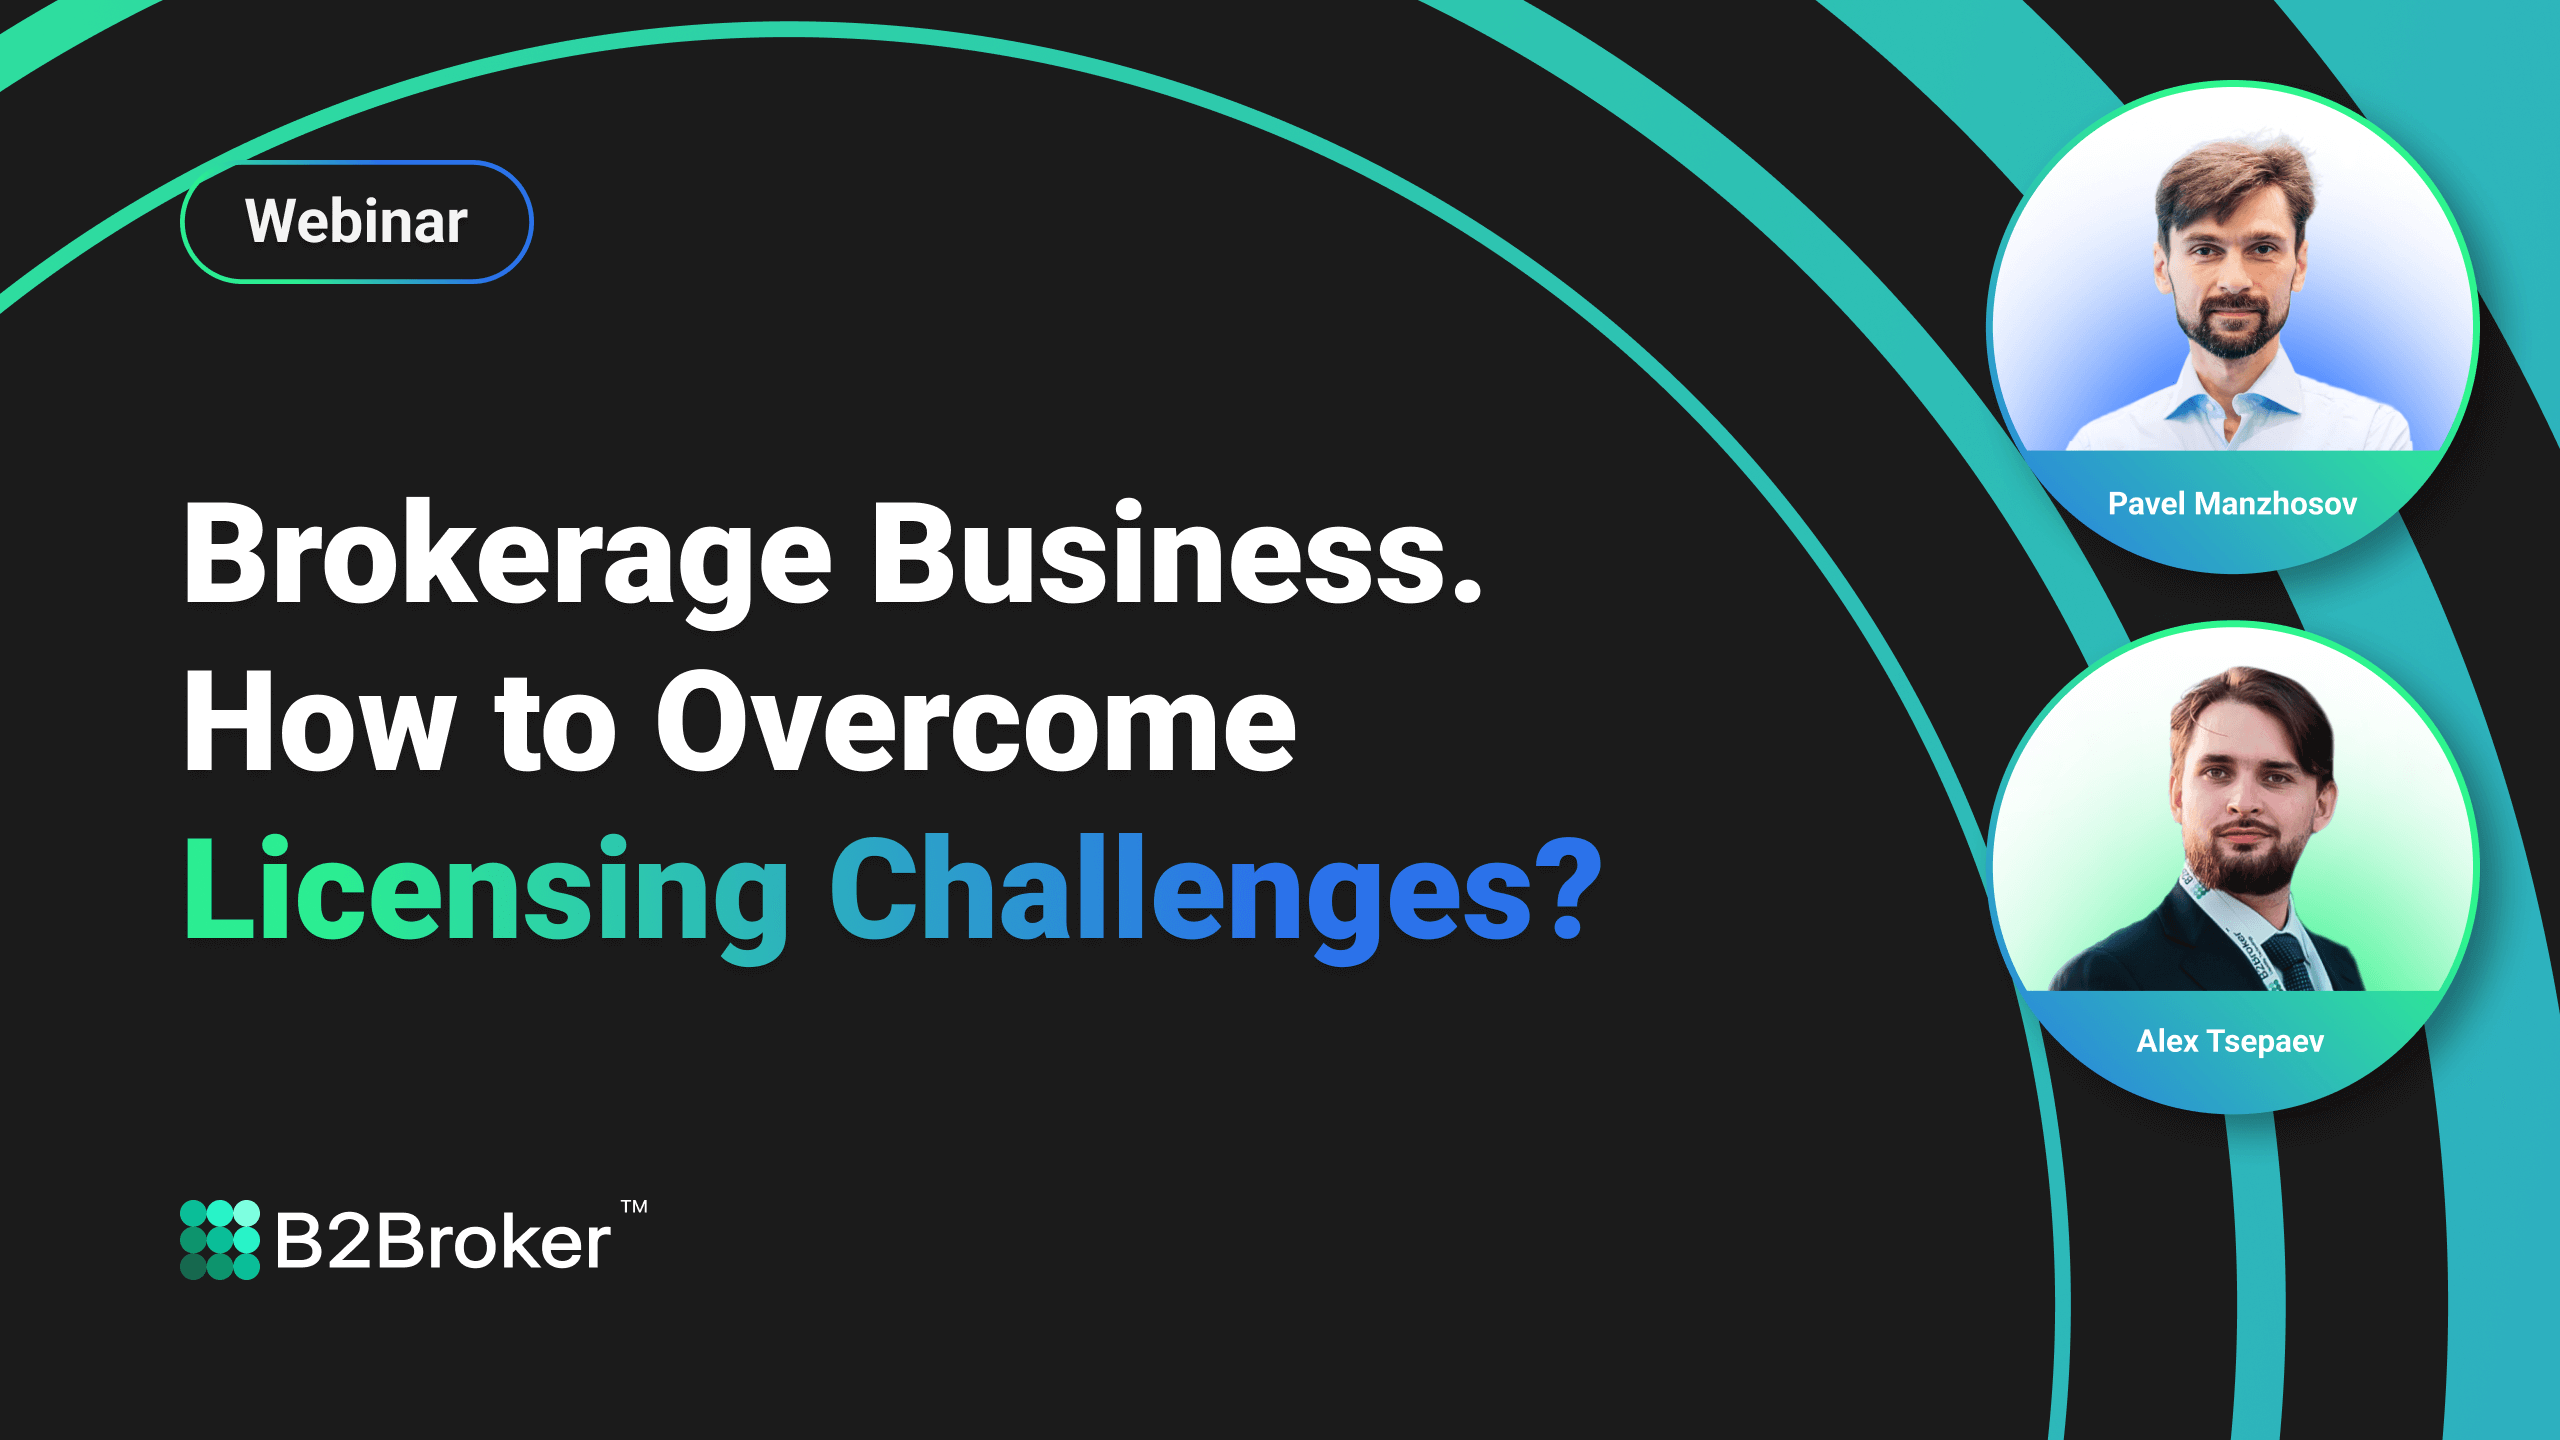 Brokerage Business. How to Overcome Licensing Challenges?